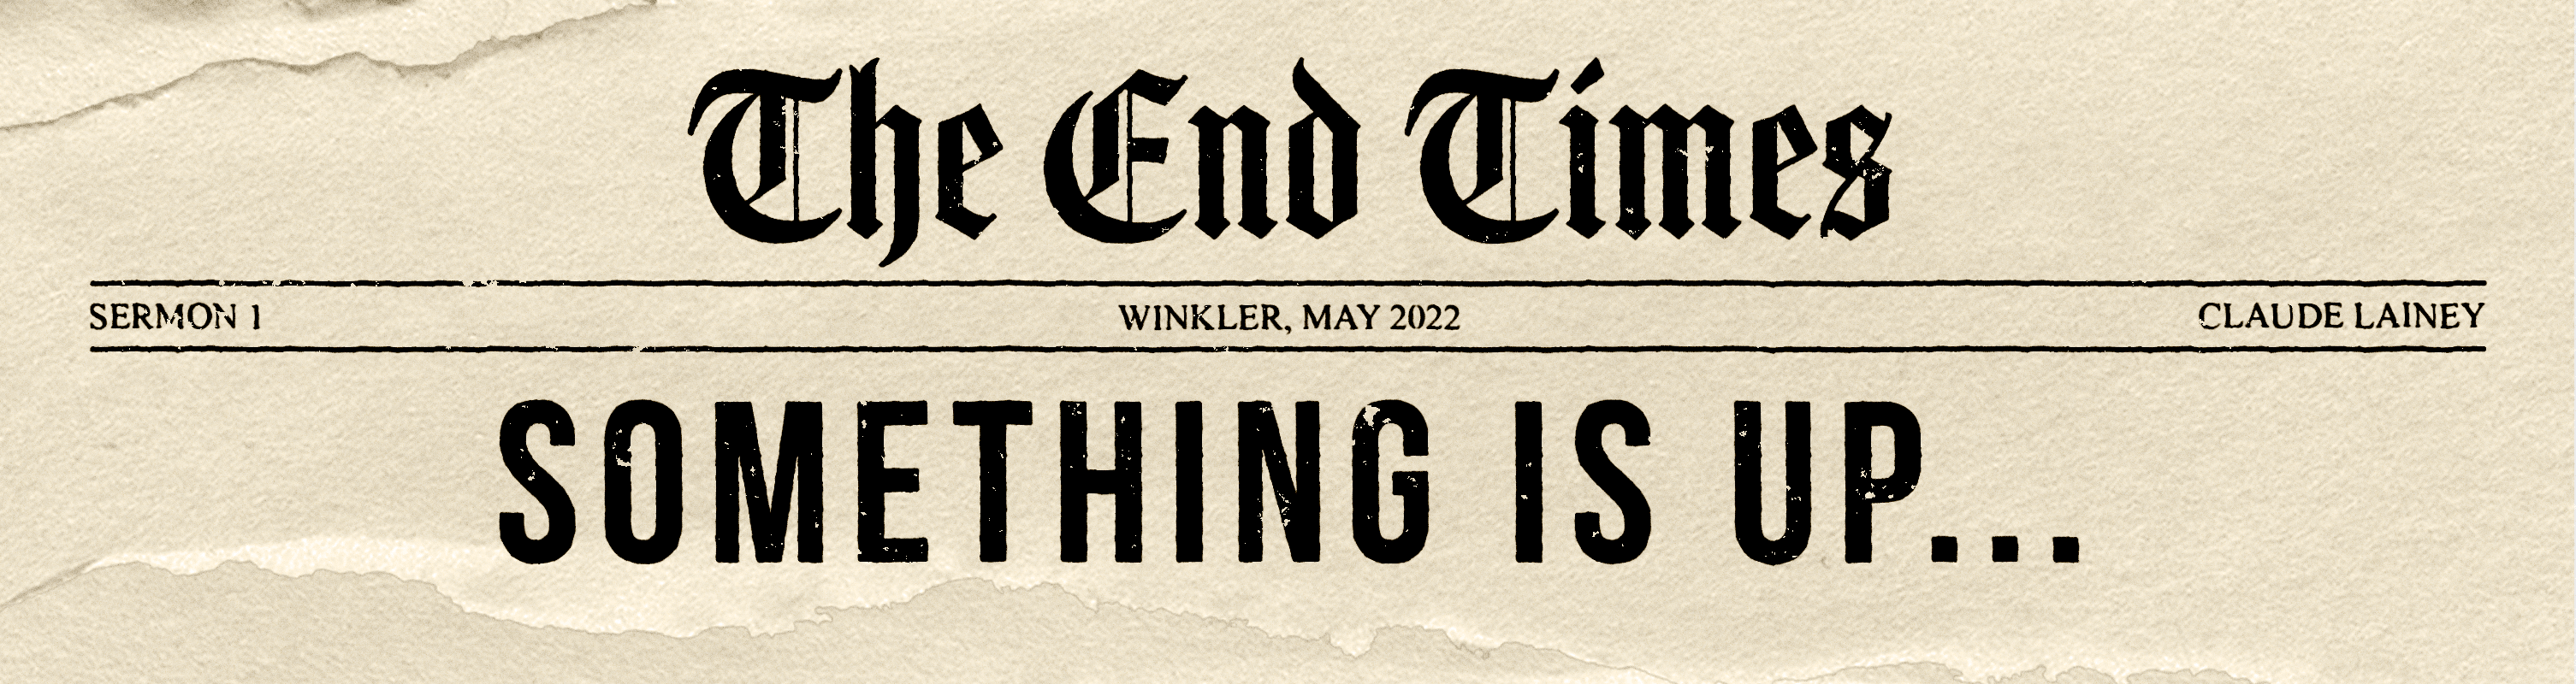 The-End-Times-WEBSITE